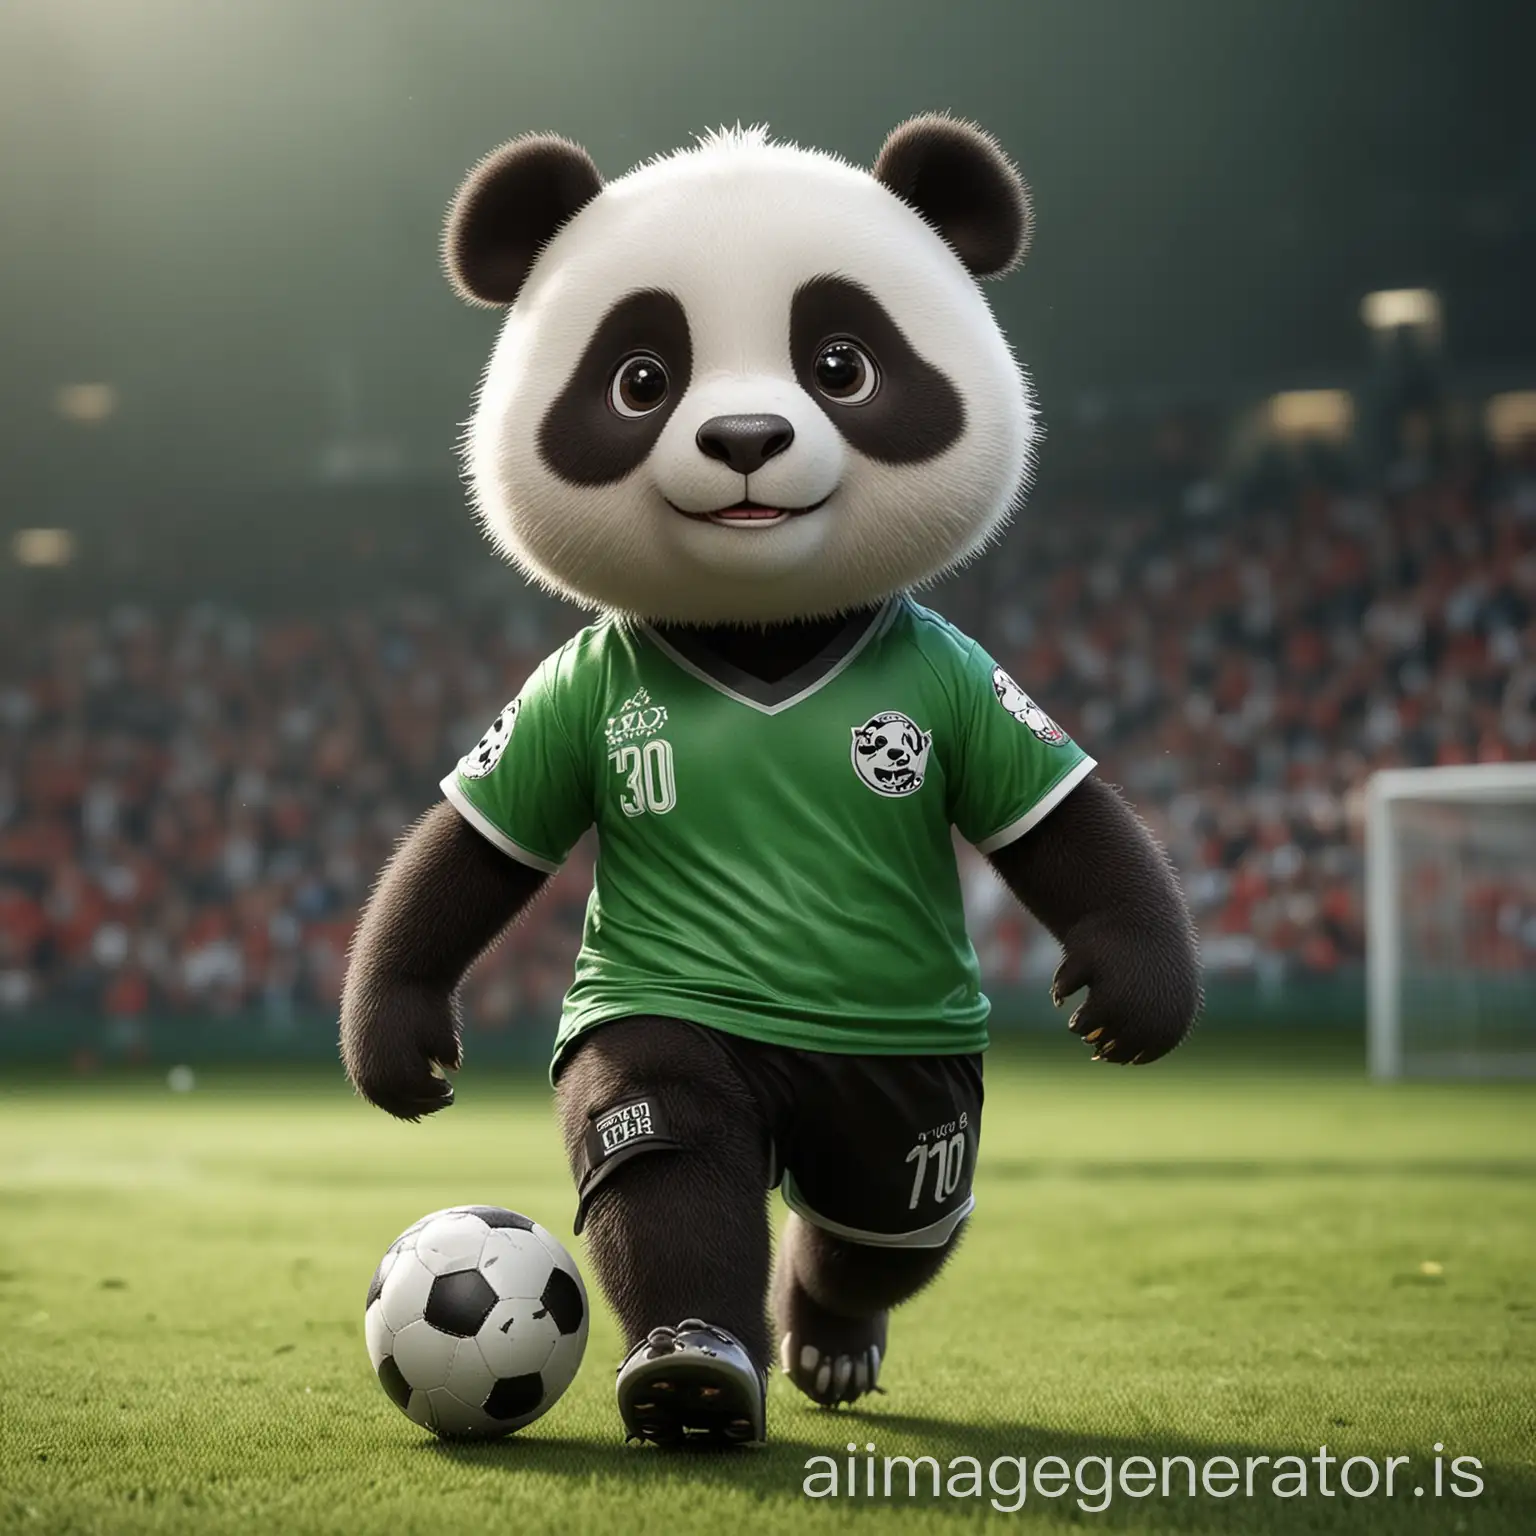 3D-Panda-Soccer-Player-in-Action